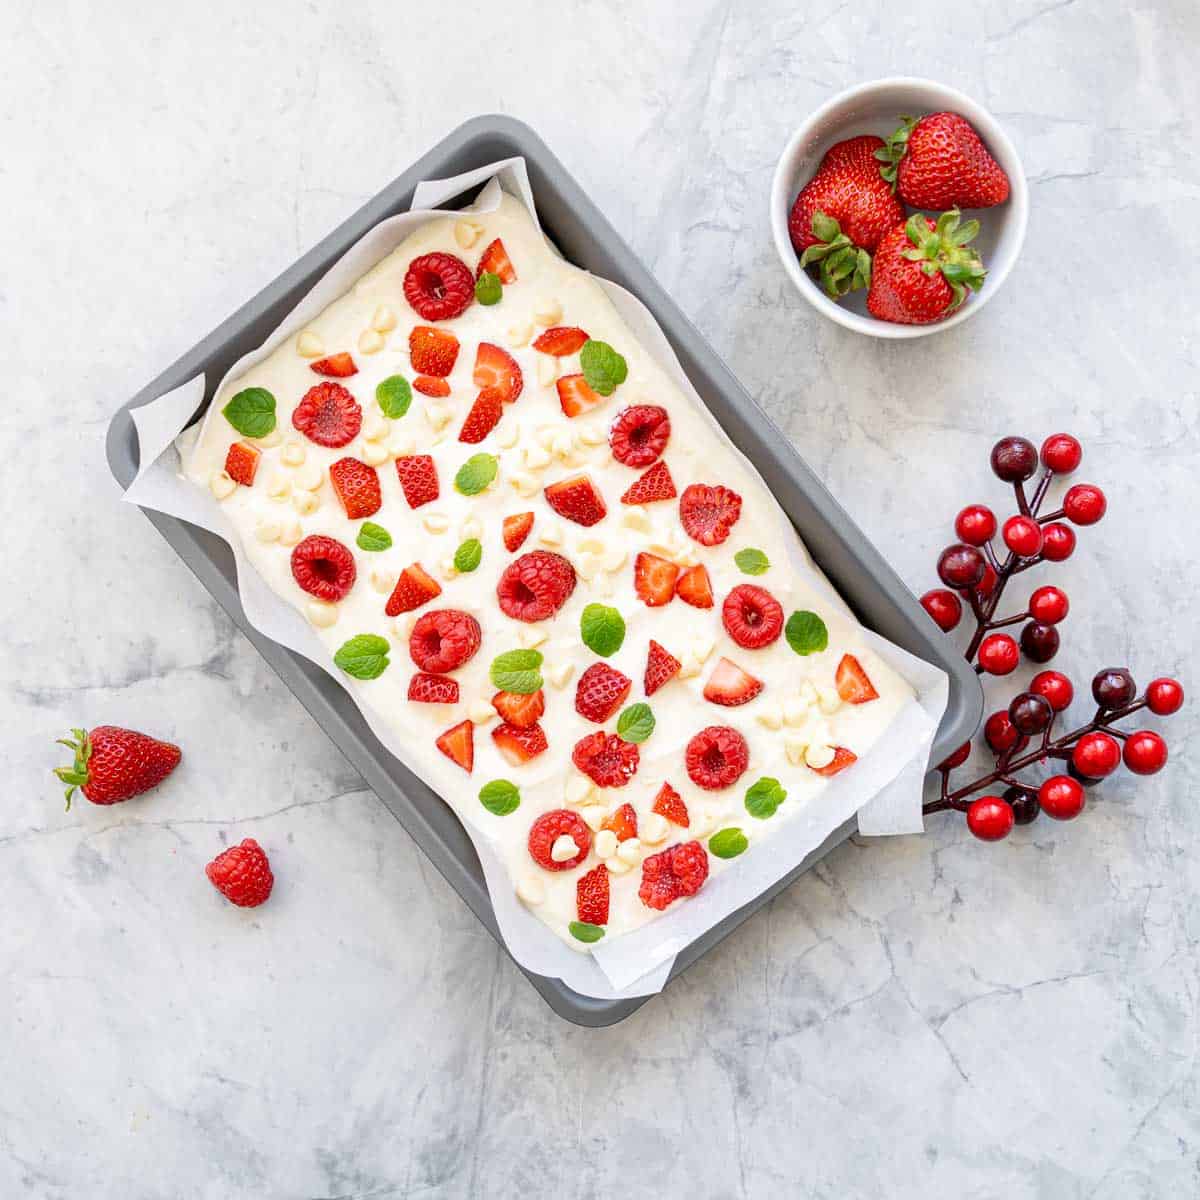 A lined tray of yoghurt bark which is scattered with sliced strawberries, raspberries and baby mint leaves scattered over the top which is sitting next to a small ramekin of strawberries and a Christmas holly decoration